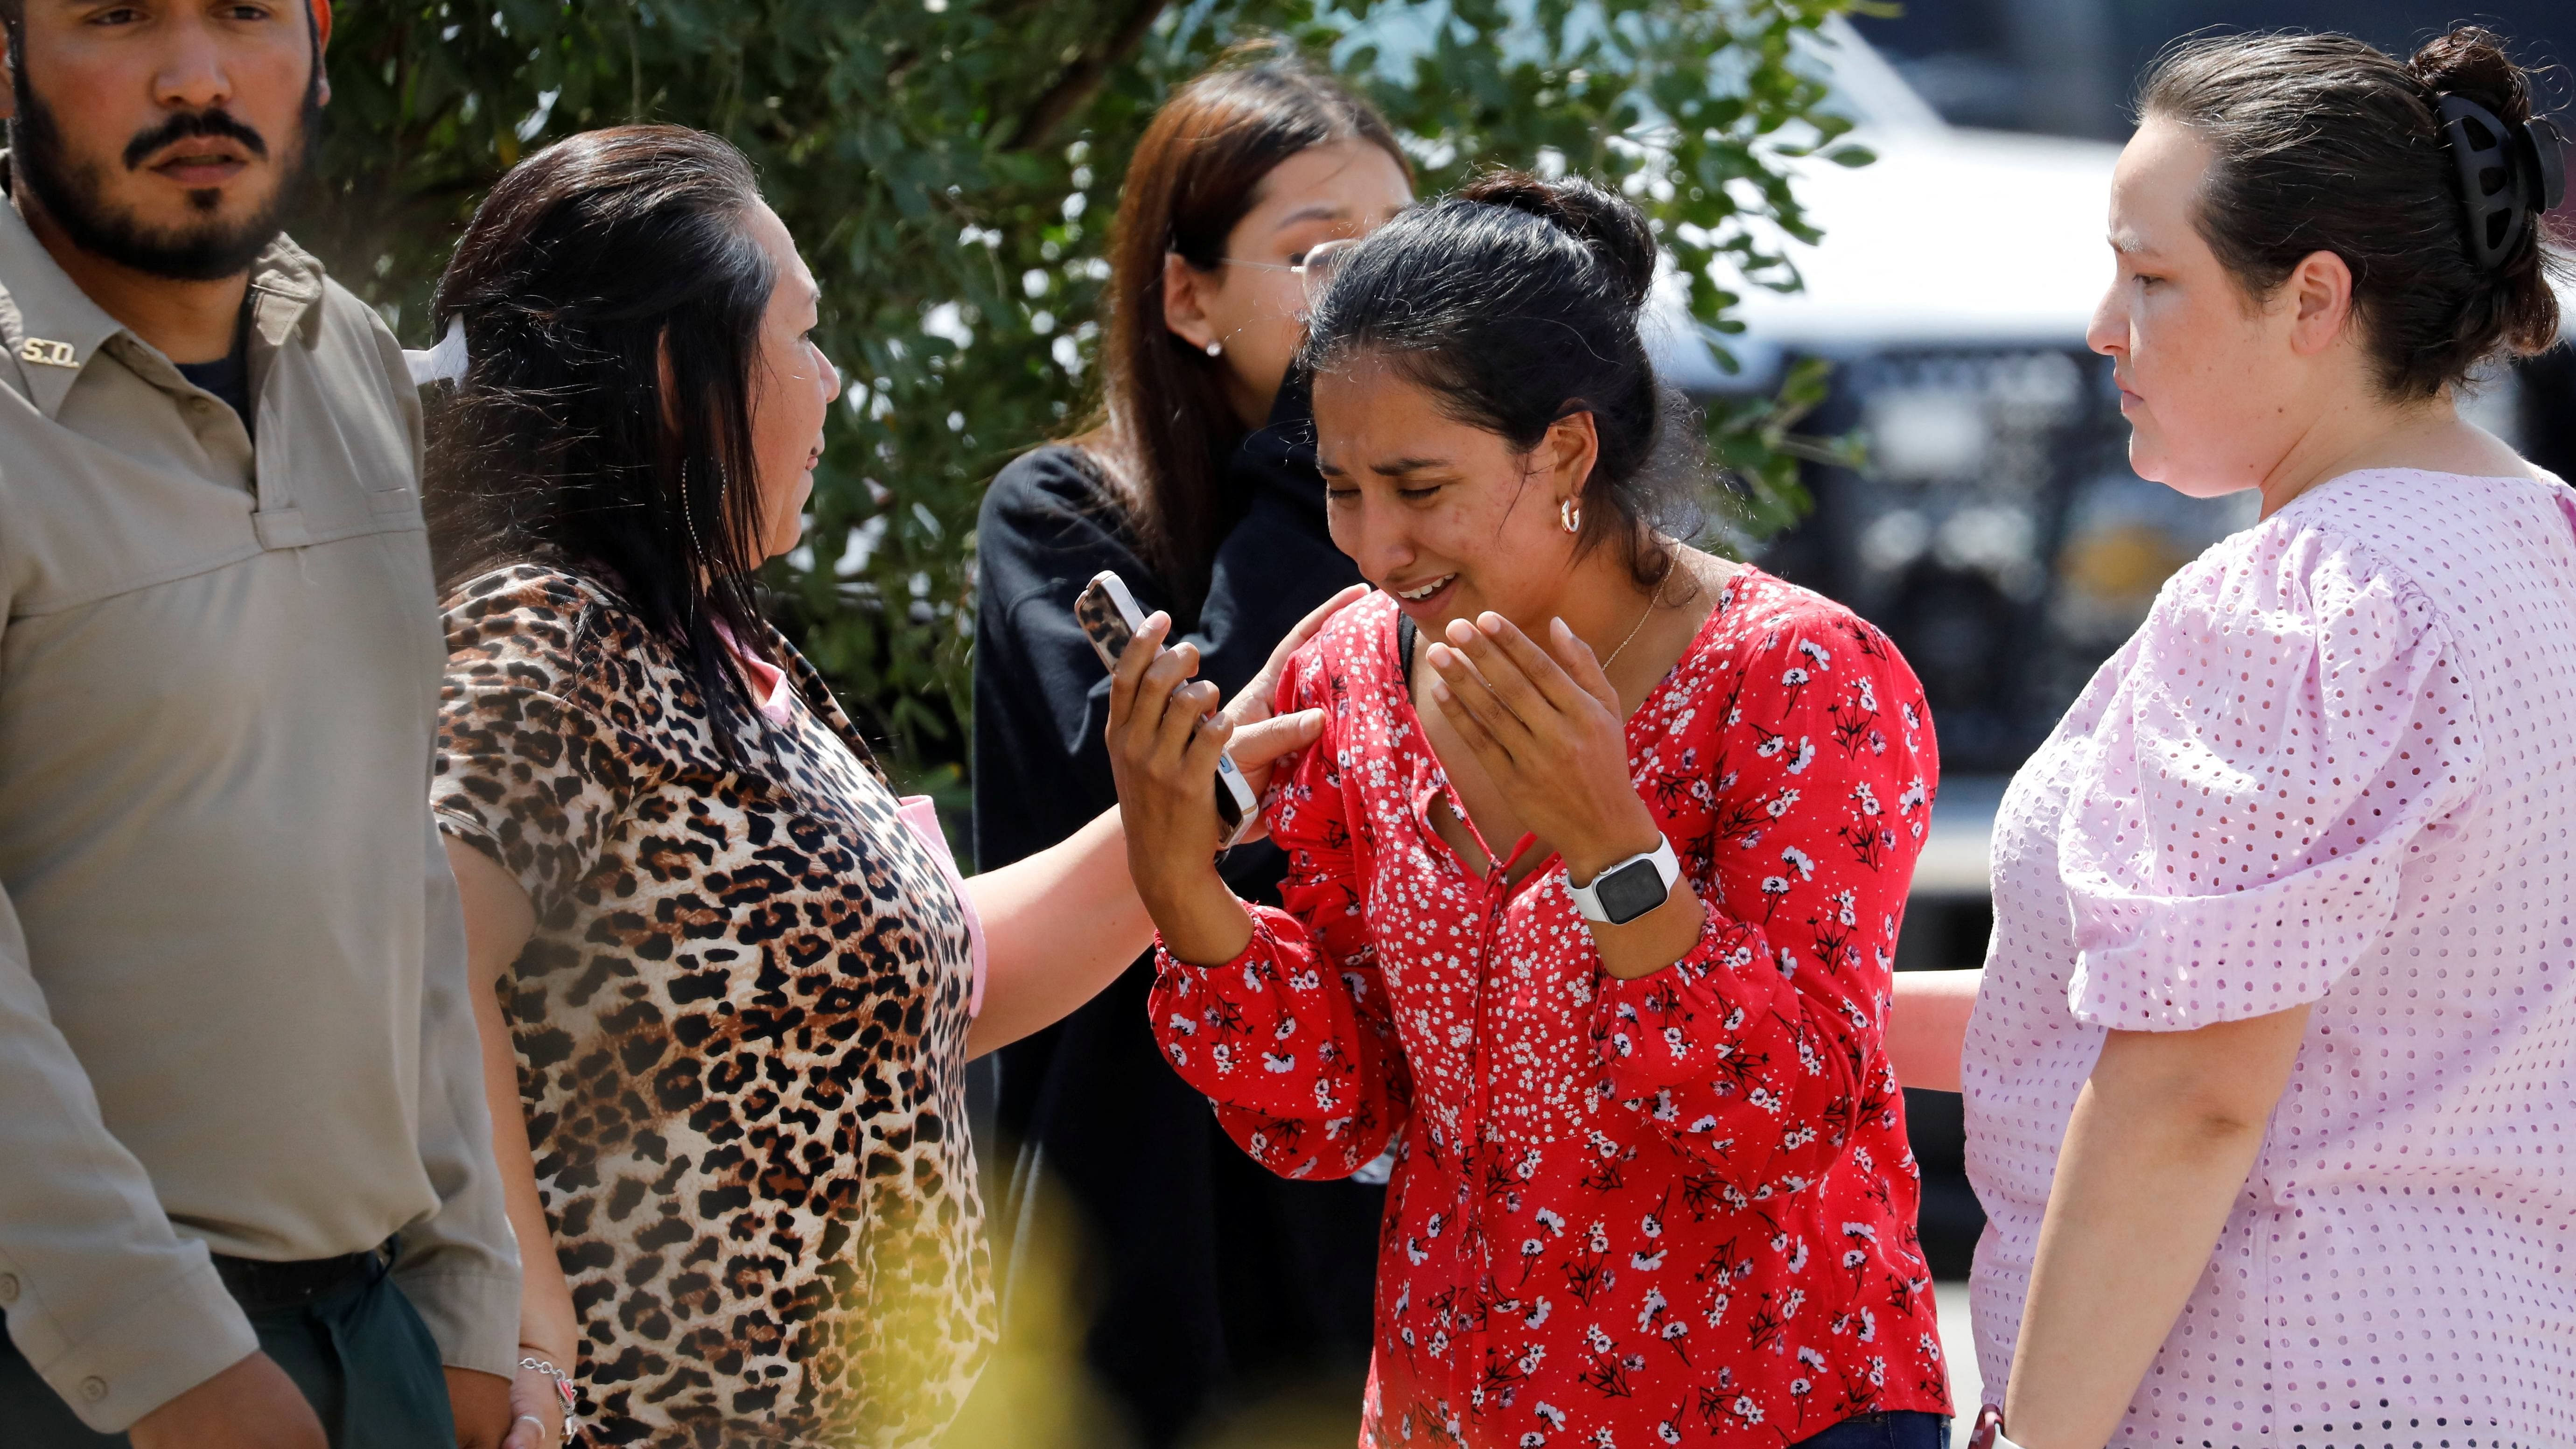 A woman reacts outside the Ssgt Willie de Leon Civic Center, where students had been transported from Robb Elementary School after a shooting. Credit: Reuters Photo